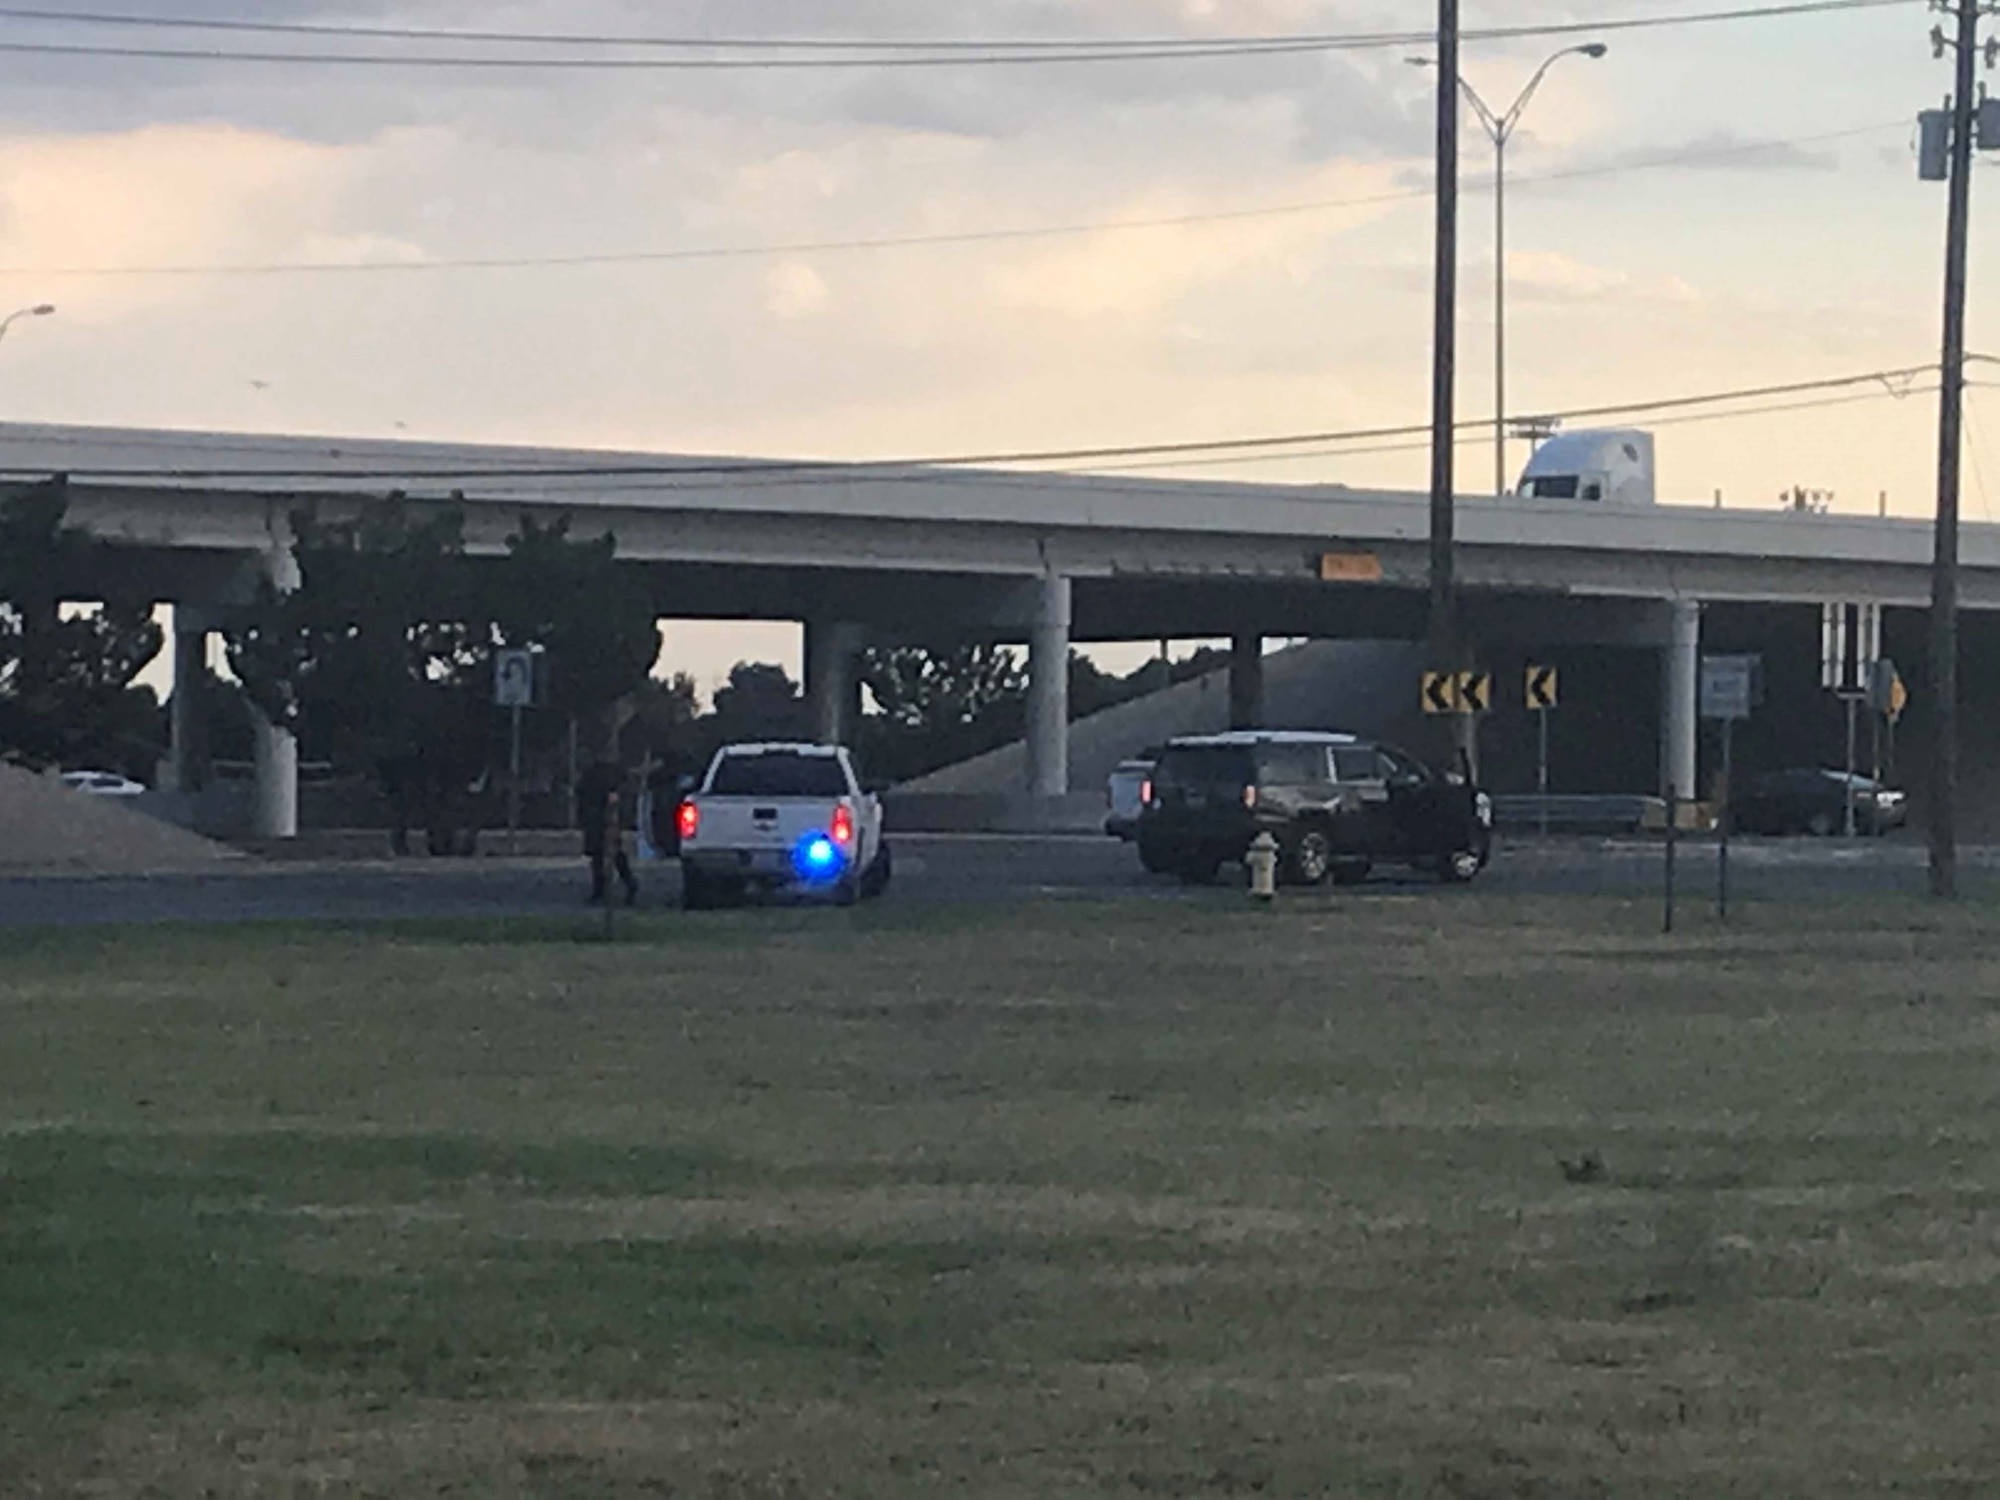 A police cruiser and civilian vehicle sit at an intersection following a mass shooting incident in which the civilian driver sustained three gunshot wounds Aug. 31, 2019, in Odessa, Texas. Dr. Nathaniel Ott, an Air Force Reserve instructor in Air University’s LeMay Center Joint Integration directorate, rushed out to the scene after hearing the shots from outside the ER in which he works in his civilian-capacity career. He worked with an officer and paramedic to turn a police cruiser into an impromptu ambulance to transport the victim to a nearby trauma center for treatment.